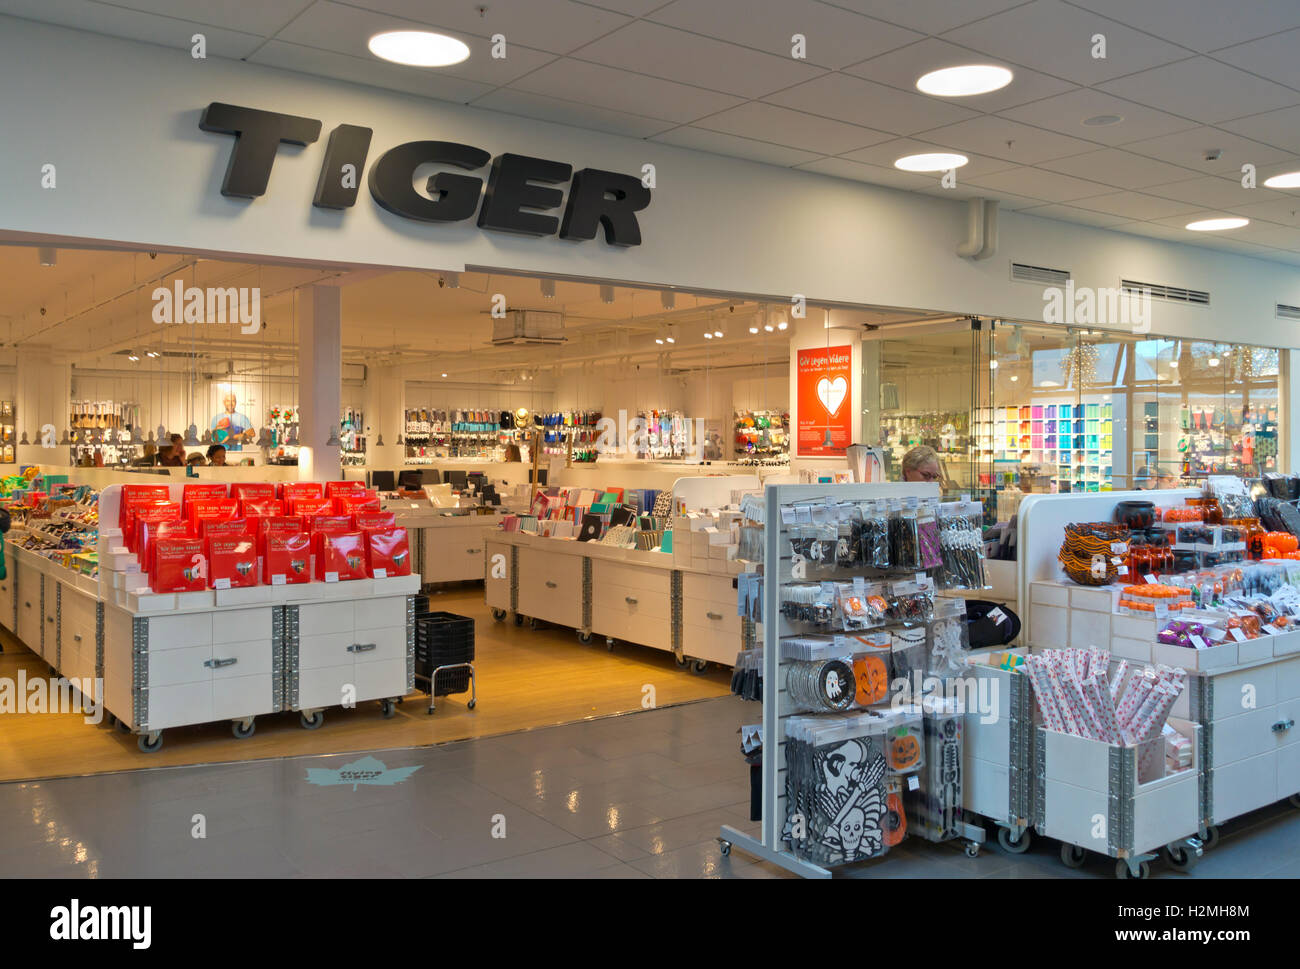 Tiger shop, Danish variety store or price point retailer chain ...